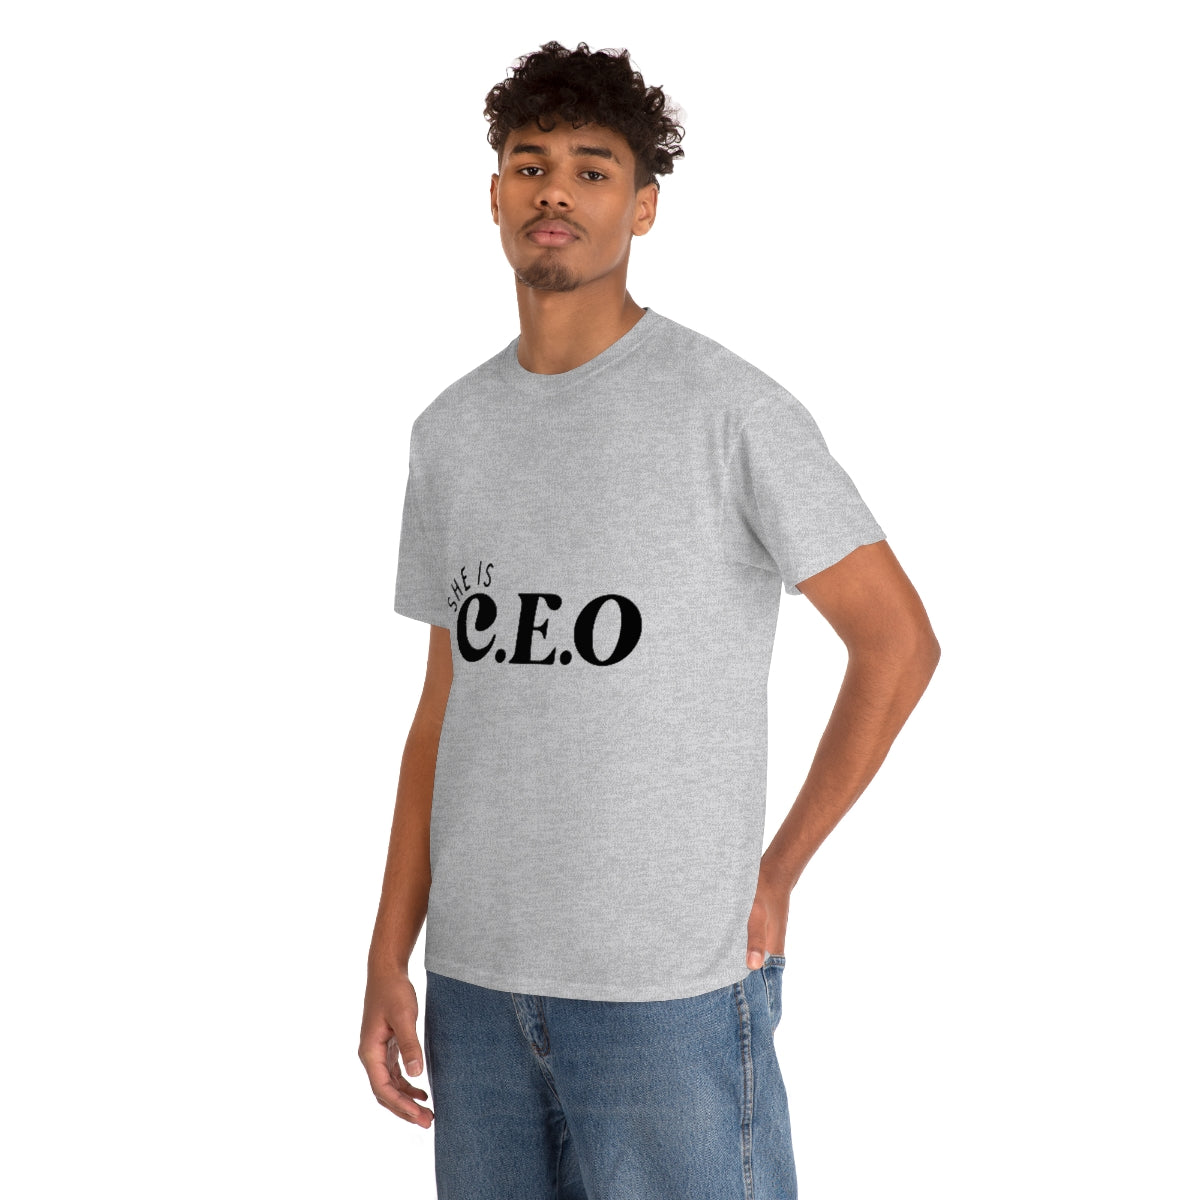 She is CEO Unisex Heavy Cotton Tee